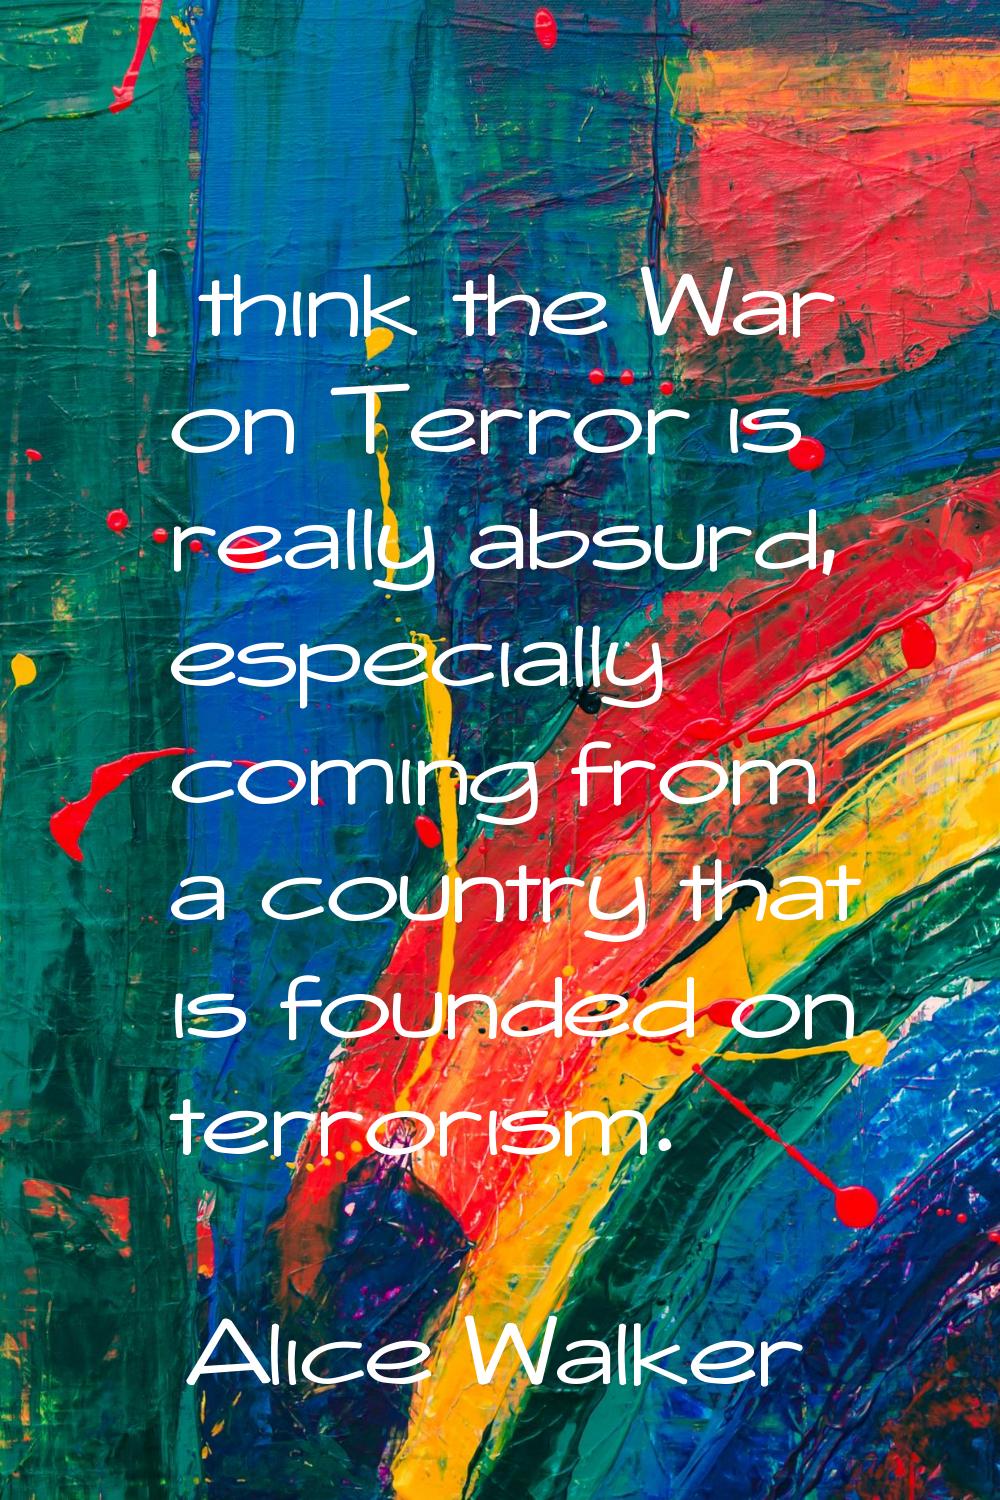 I think the War on Terror is really absurd, especially coming from a country that is founded on ter